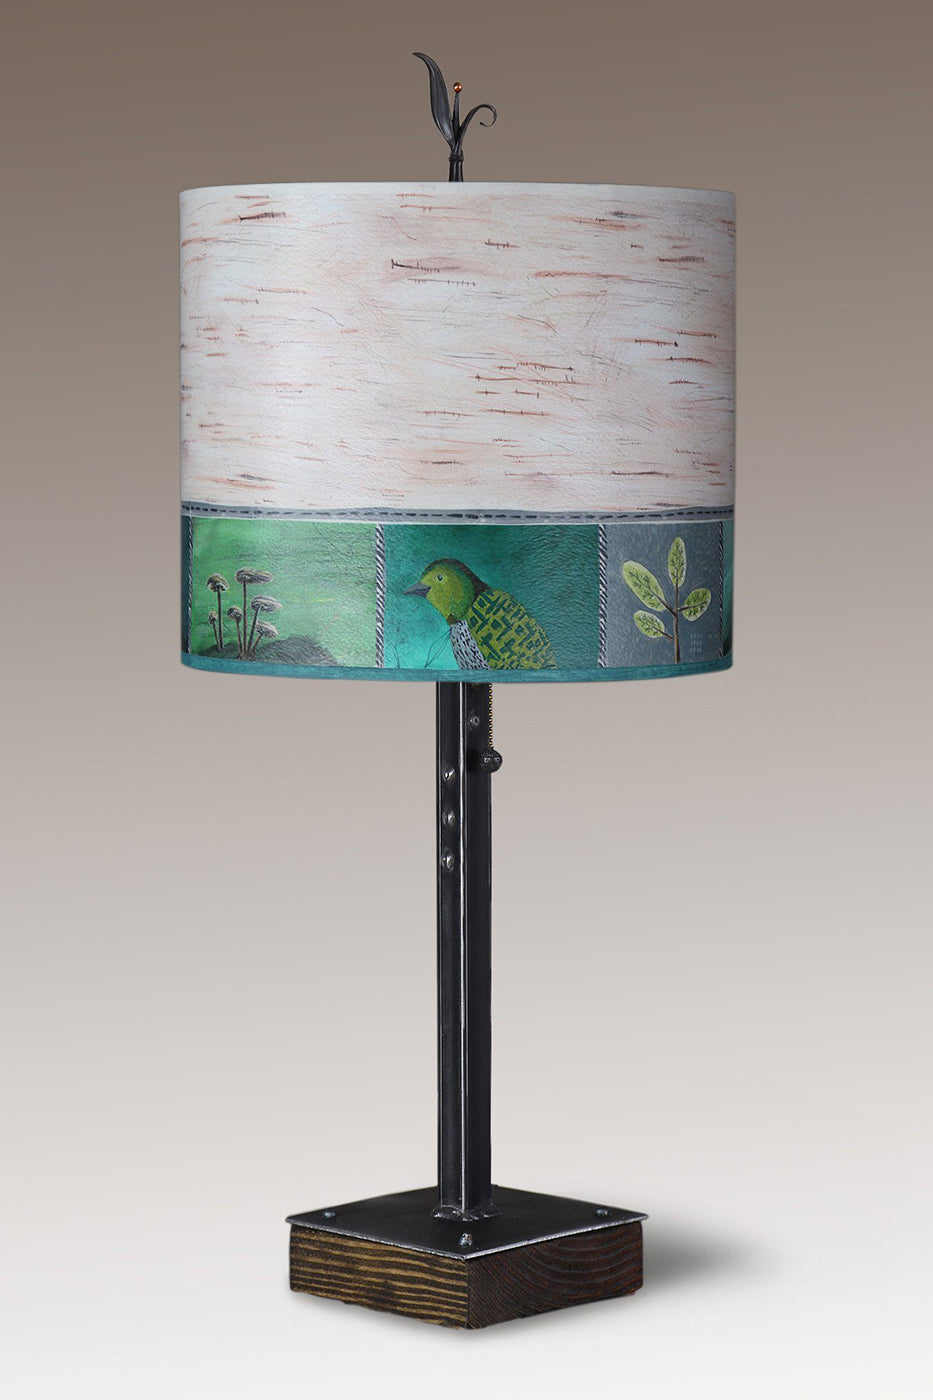 Steel Table Lamp on Wood with Large Oval Shade in Woodland Trails in Birch